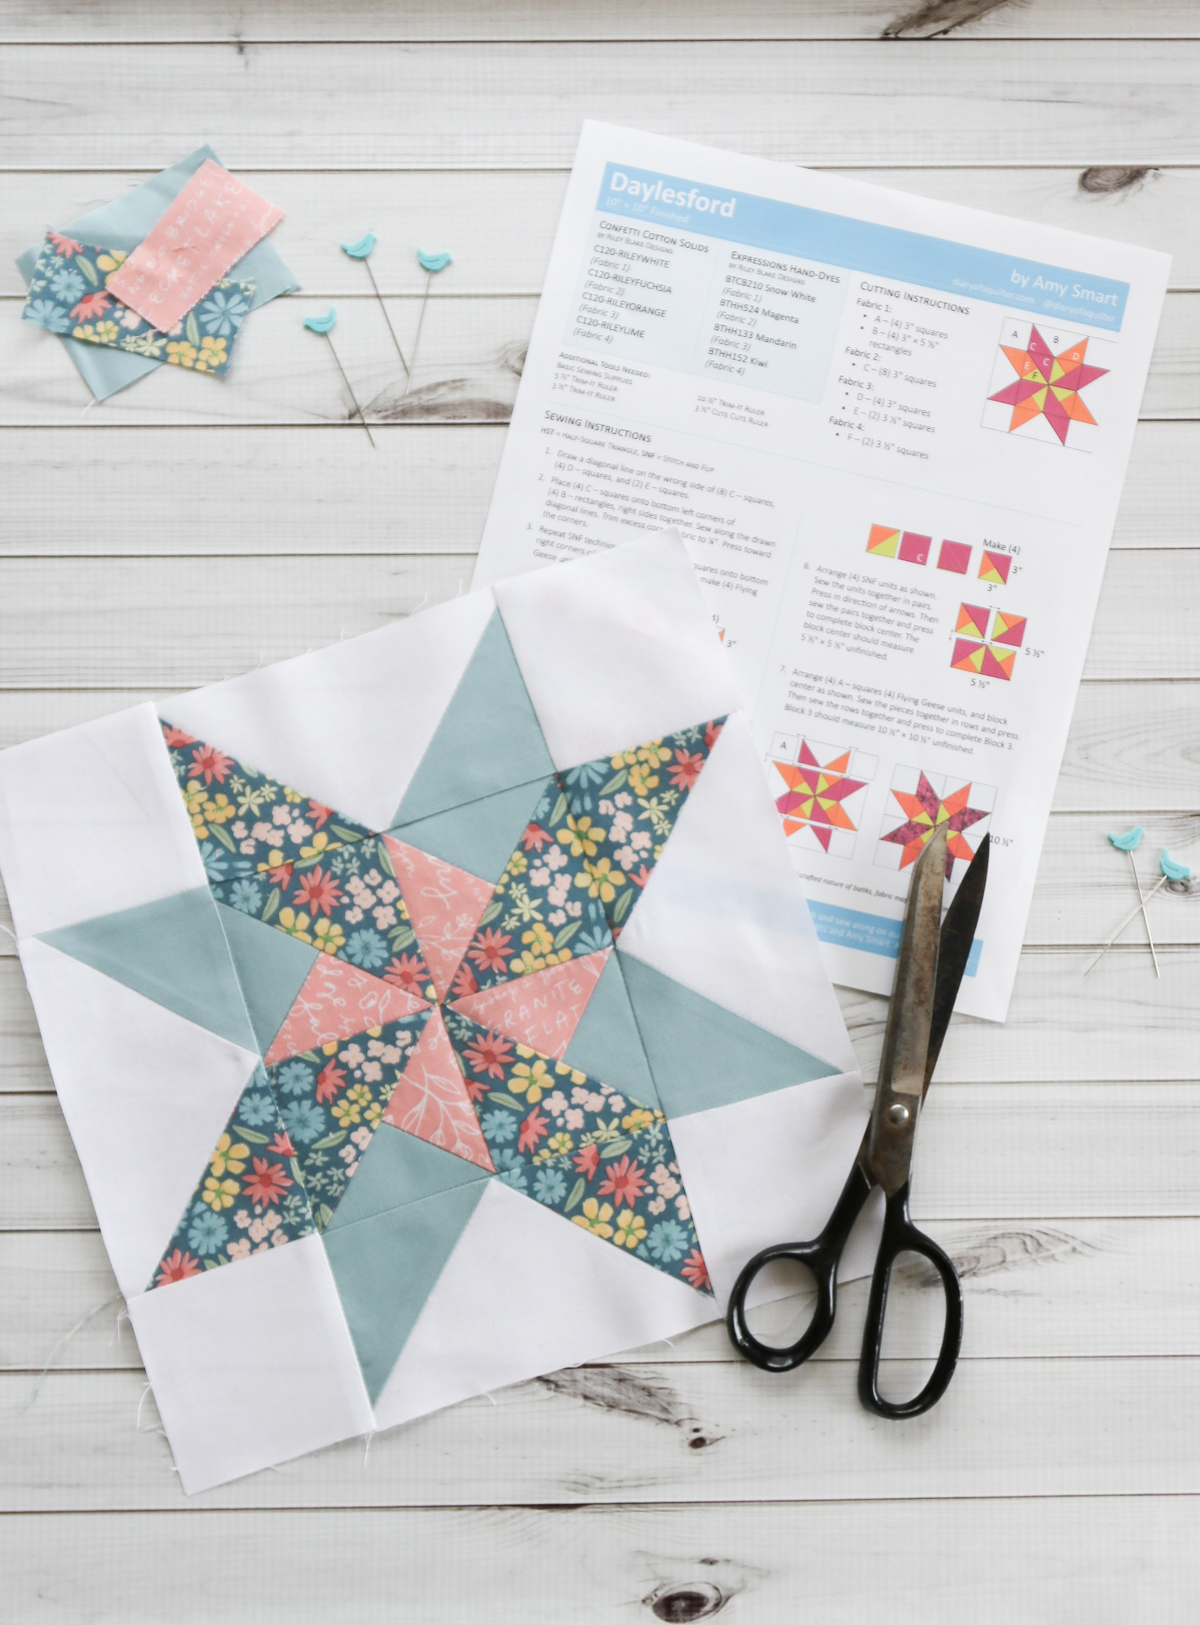 Daylesford Quilt Block - free pattern by Amy Smart